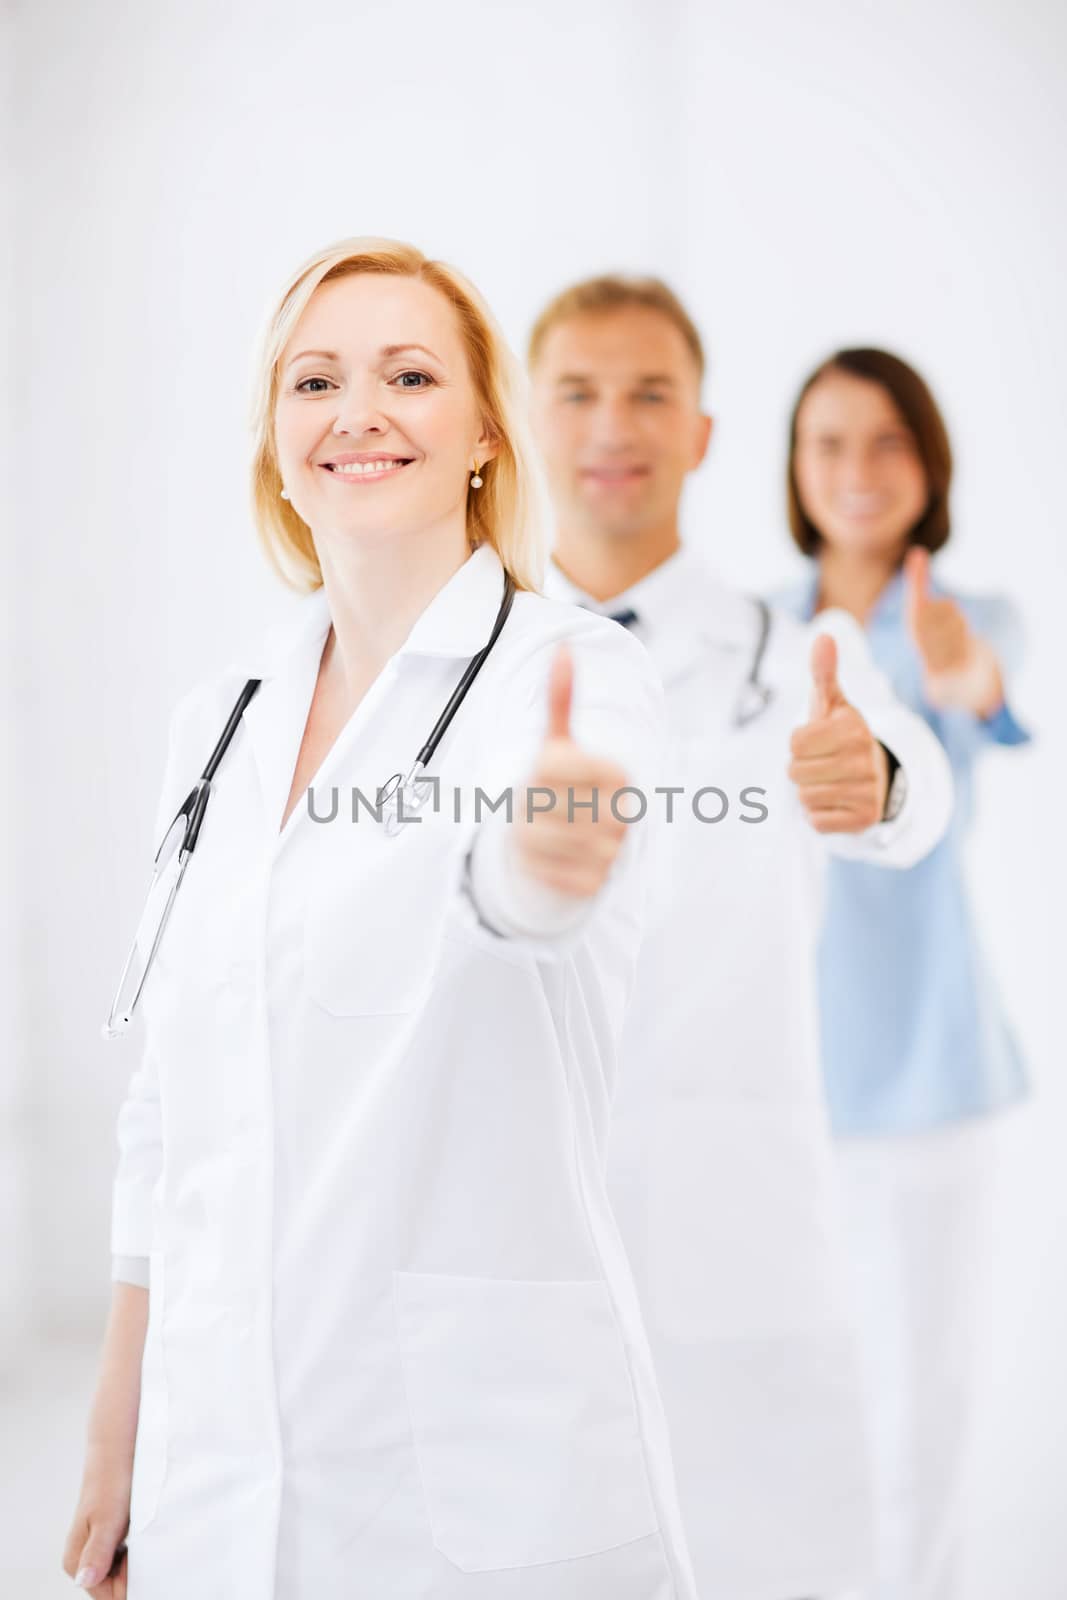 team of doctors showing thumbs up by dolgachov